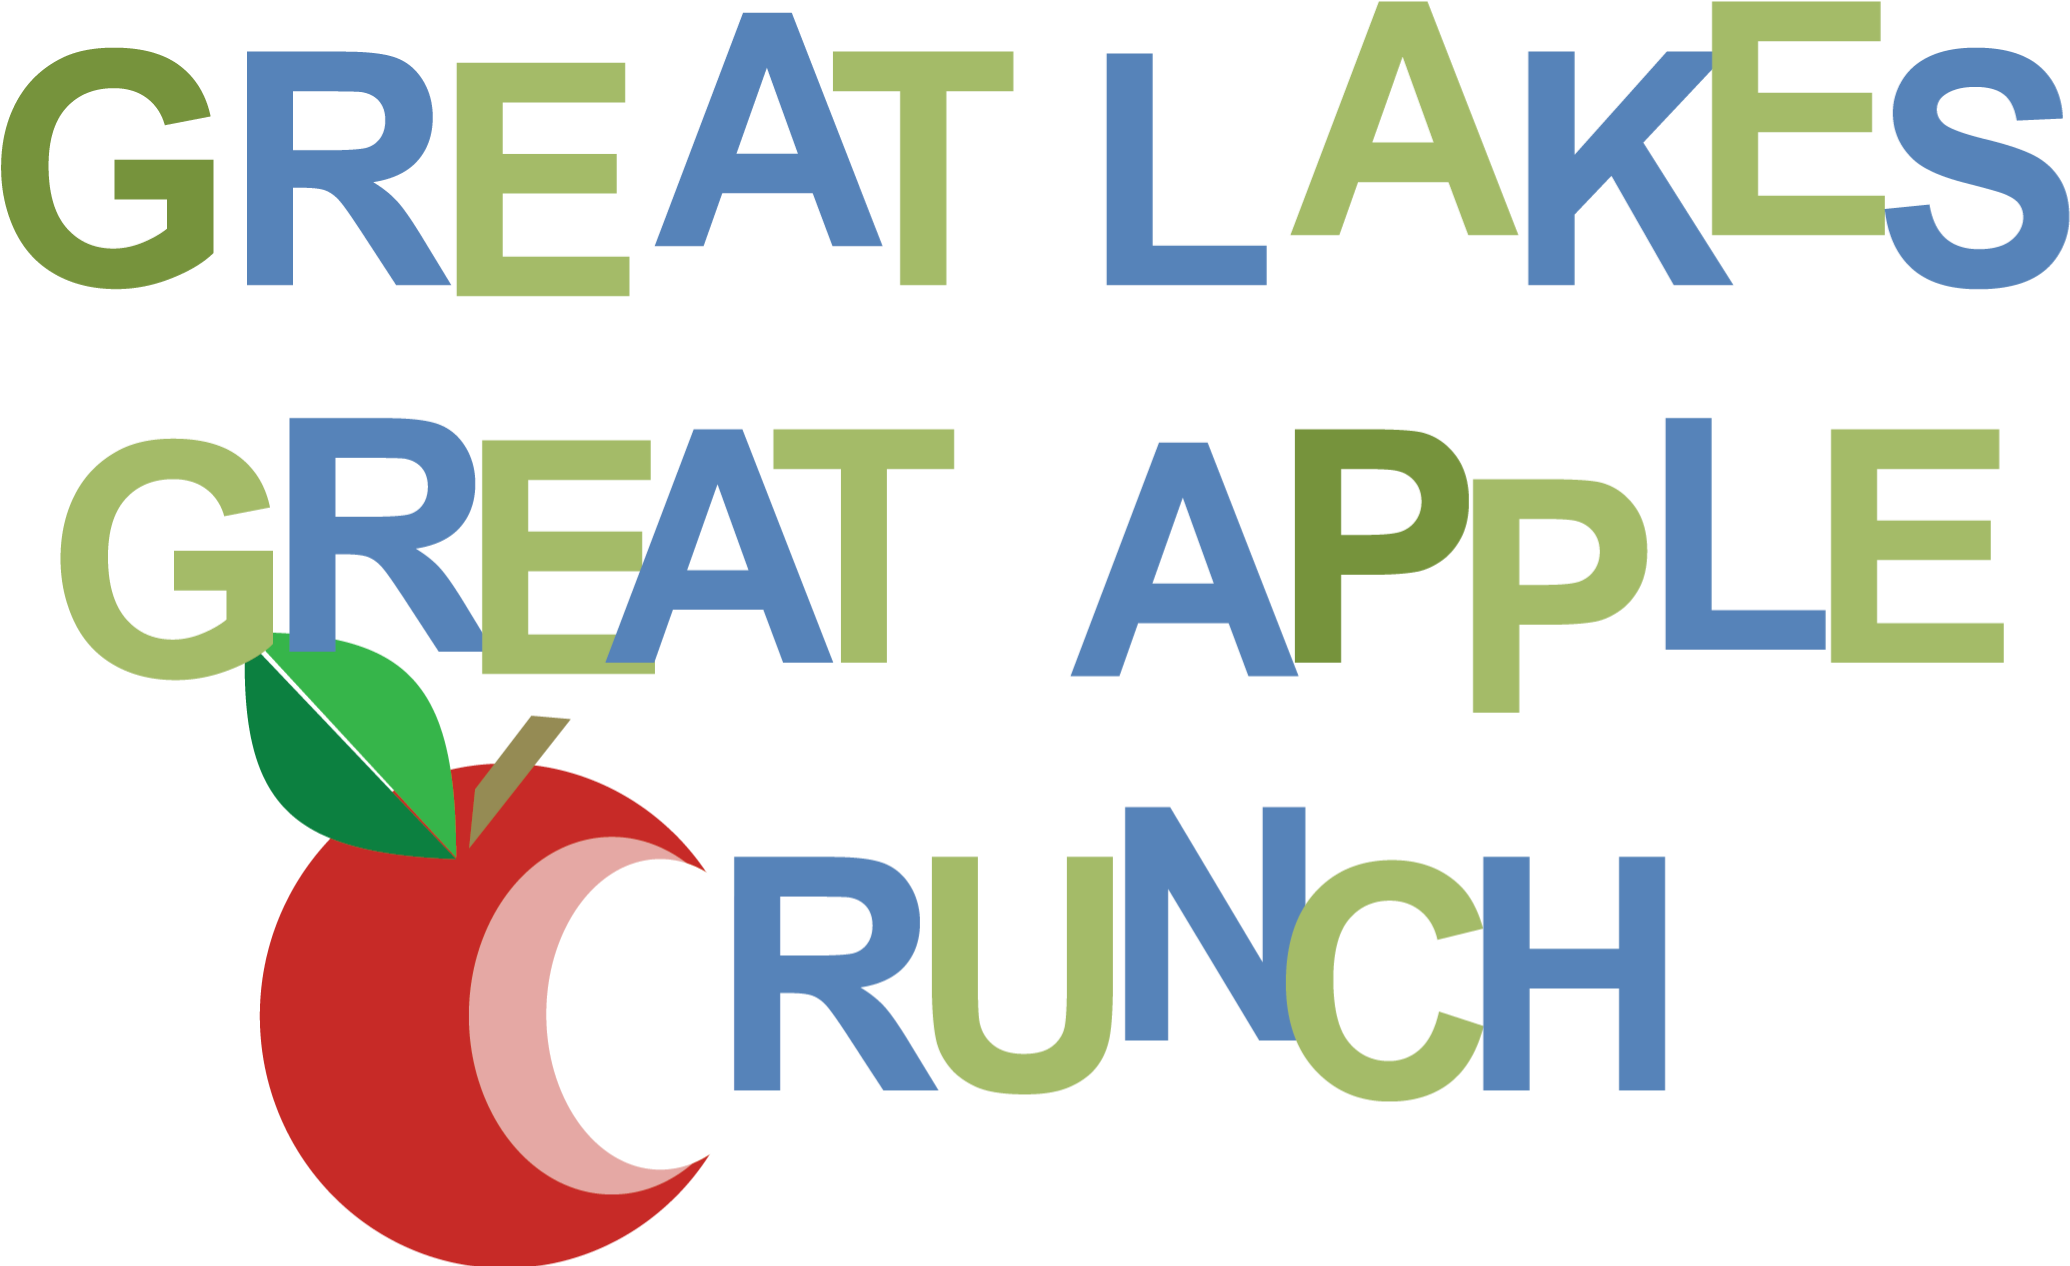 Great Lakes Apple Crunch Event Logo PNG